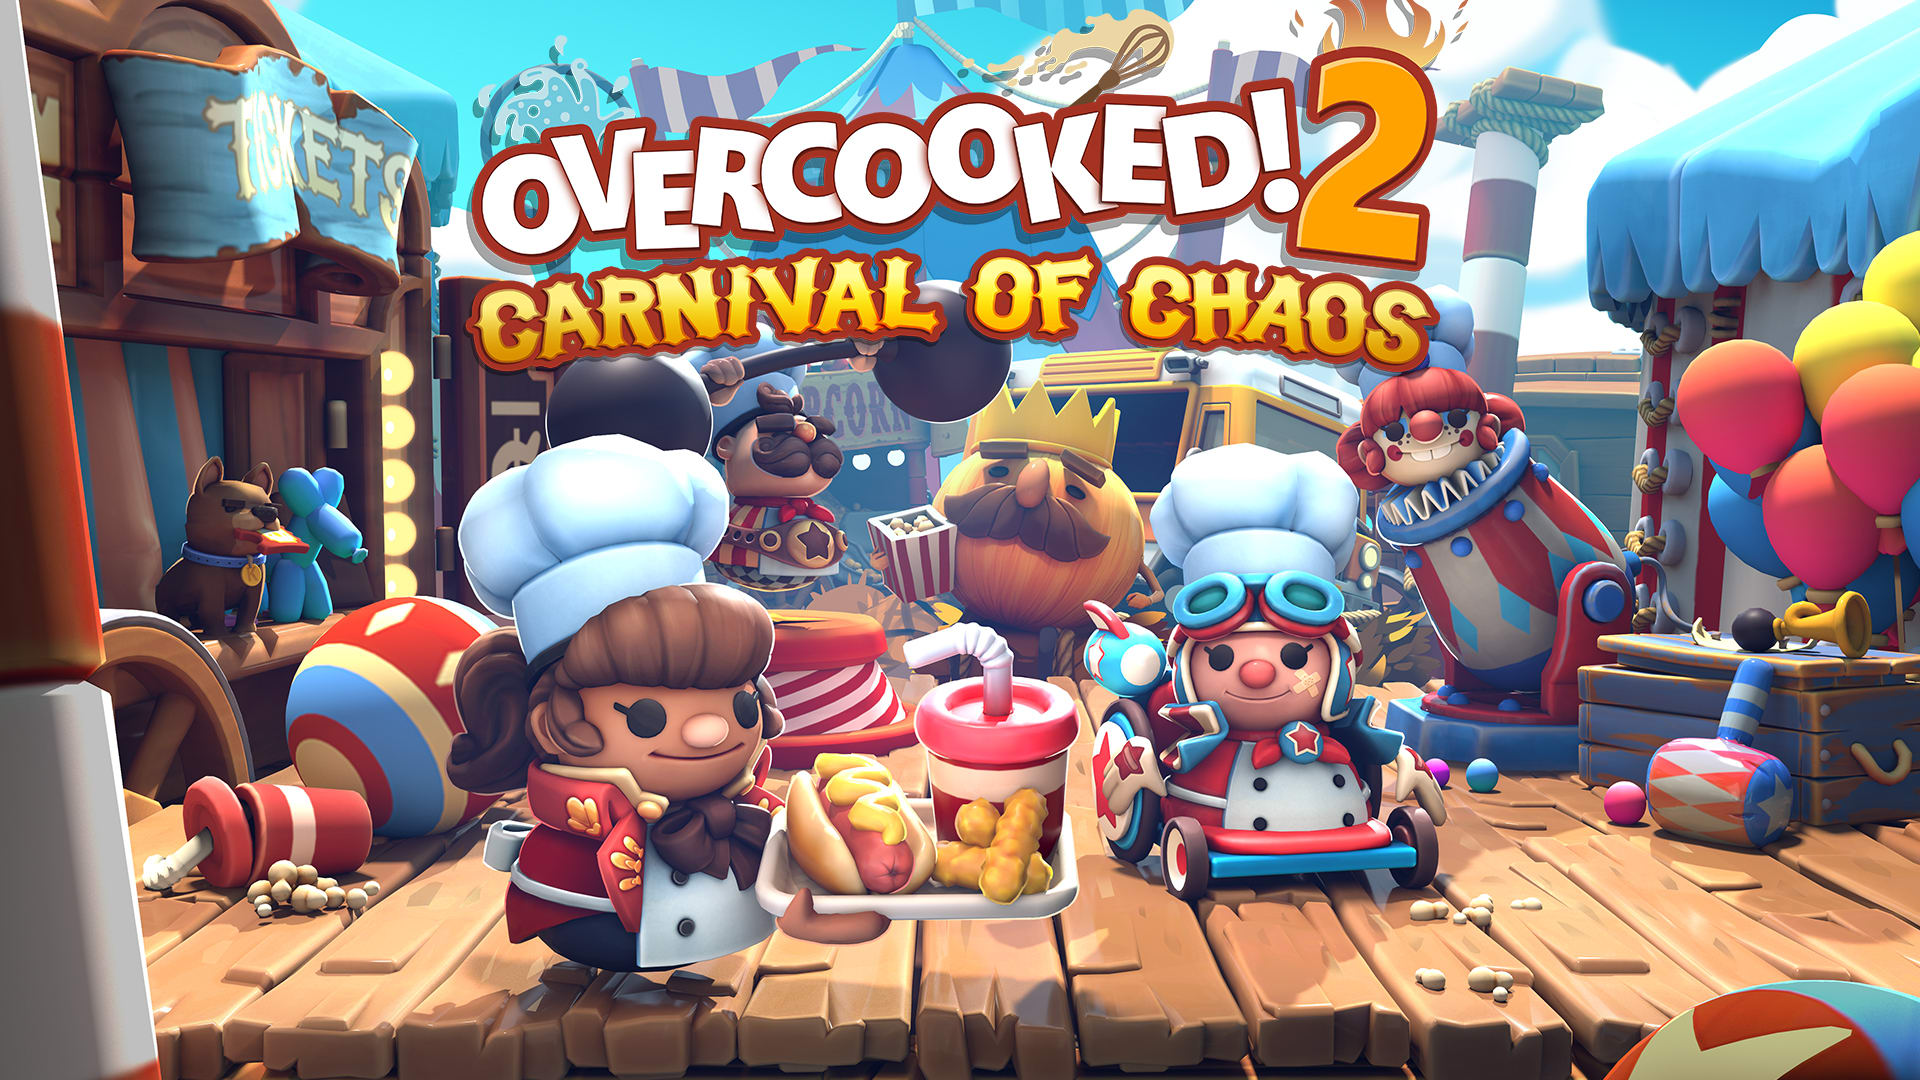 Overcooked! 2 - Carnival of Chaos 1